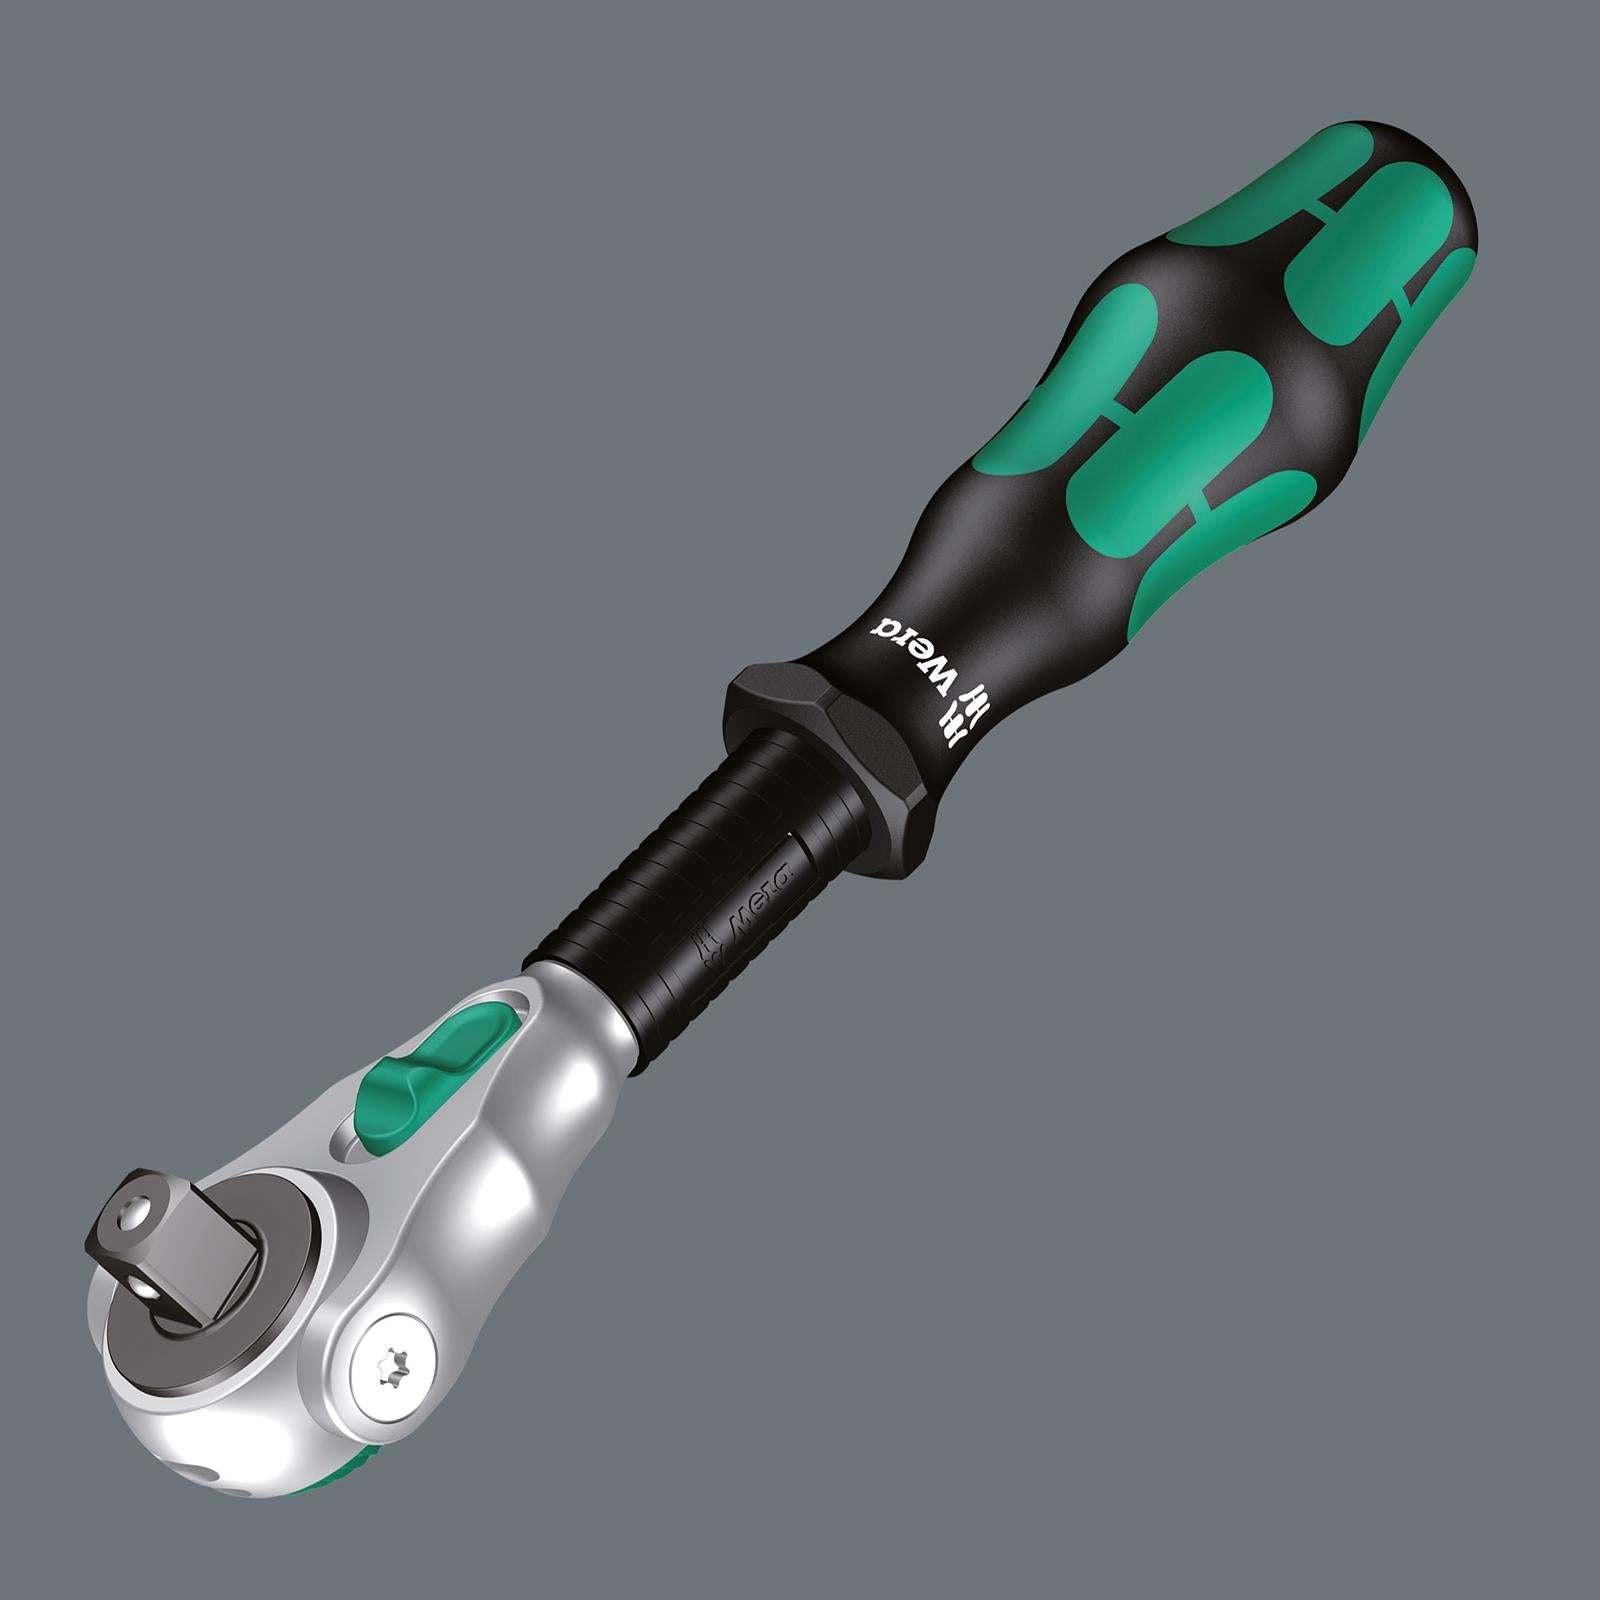 Wera Zyklop Speed Ratchet Wrench 8000B SB 3/8" Drive 199mm 72 Tooth